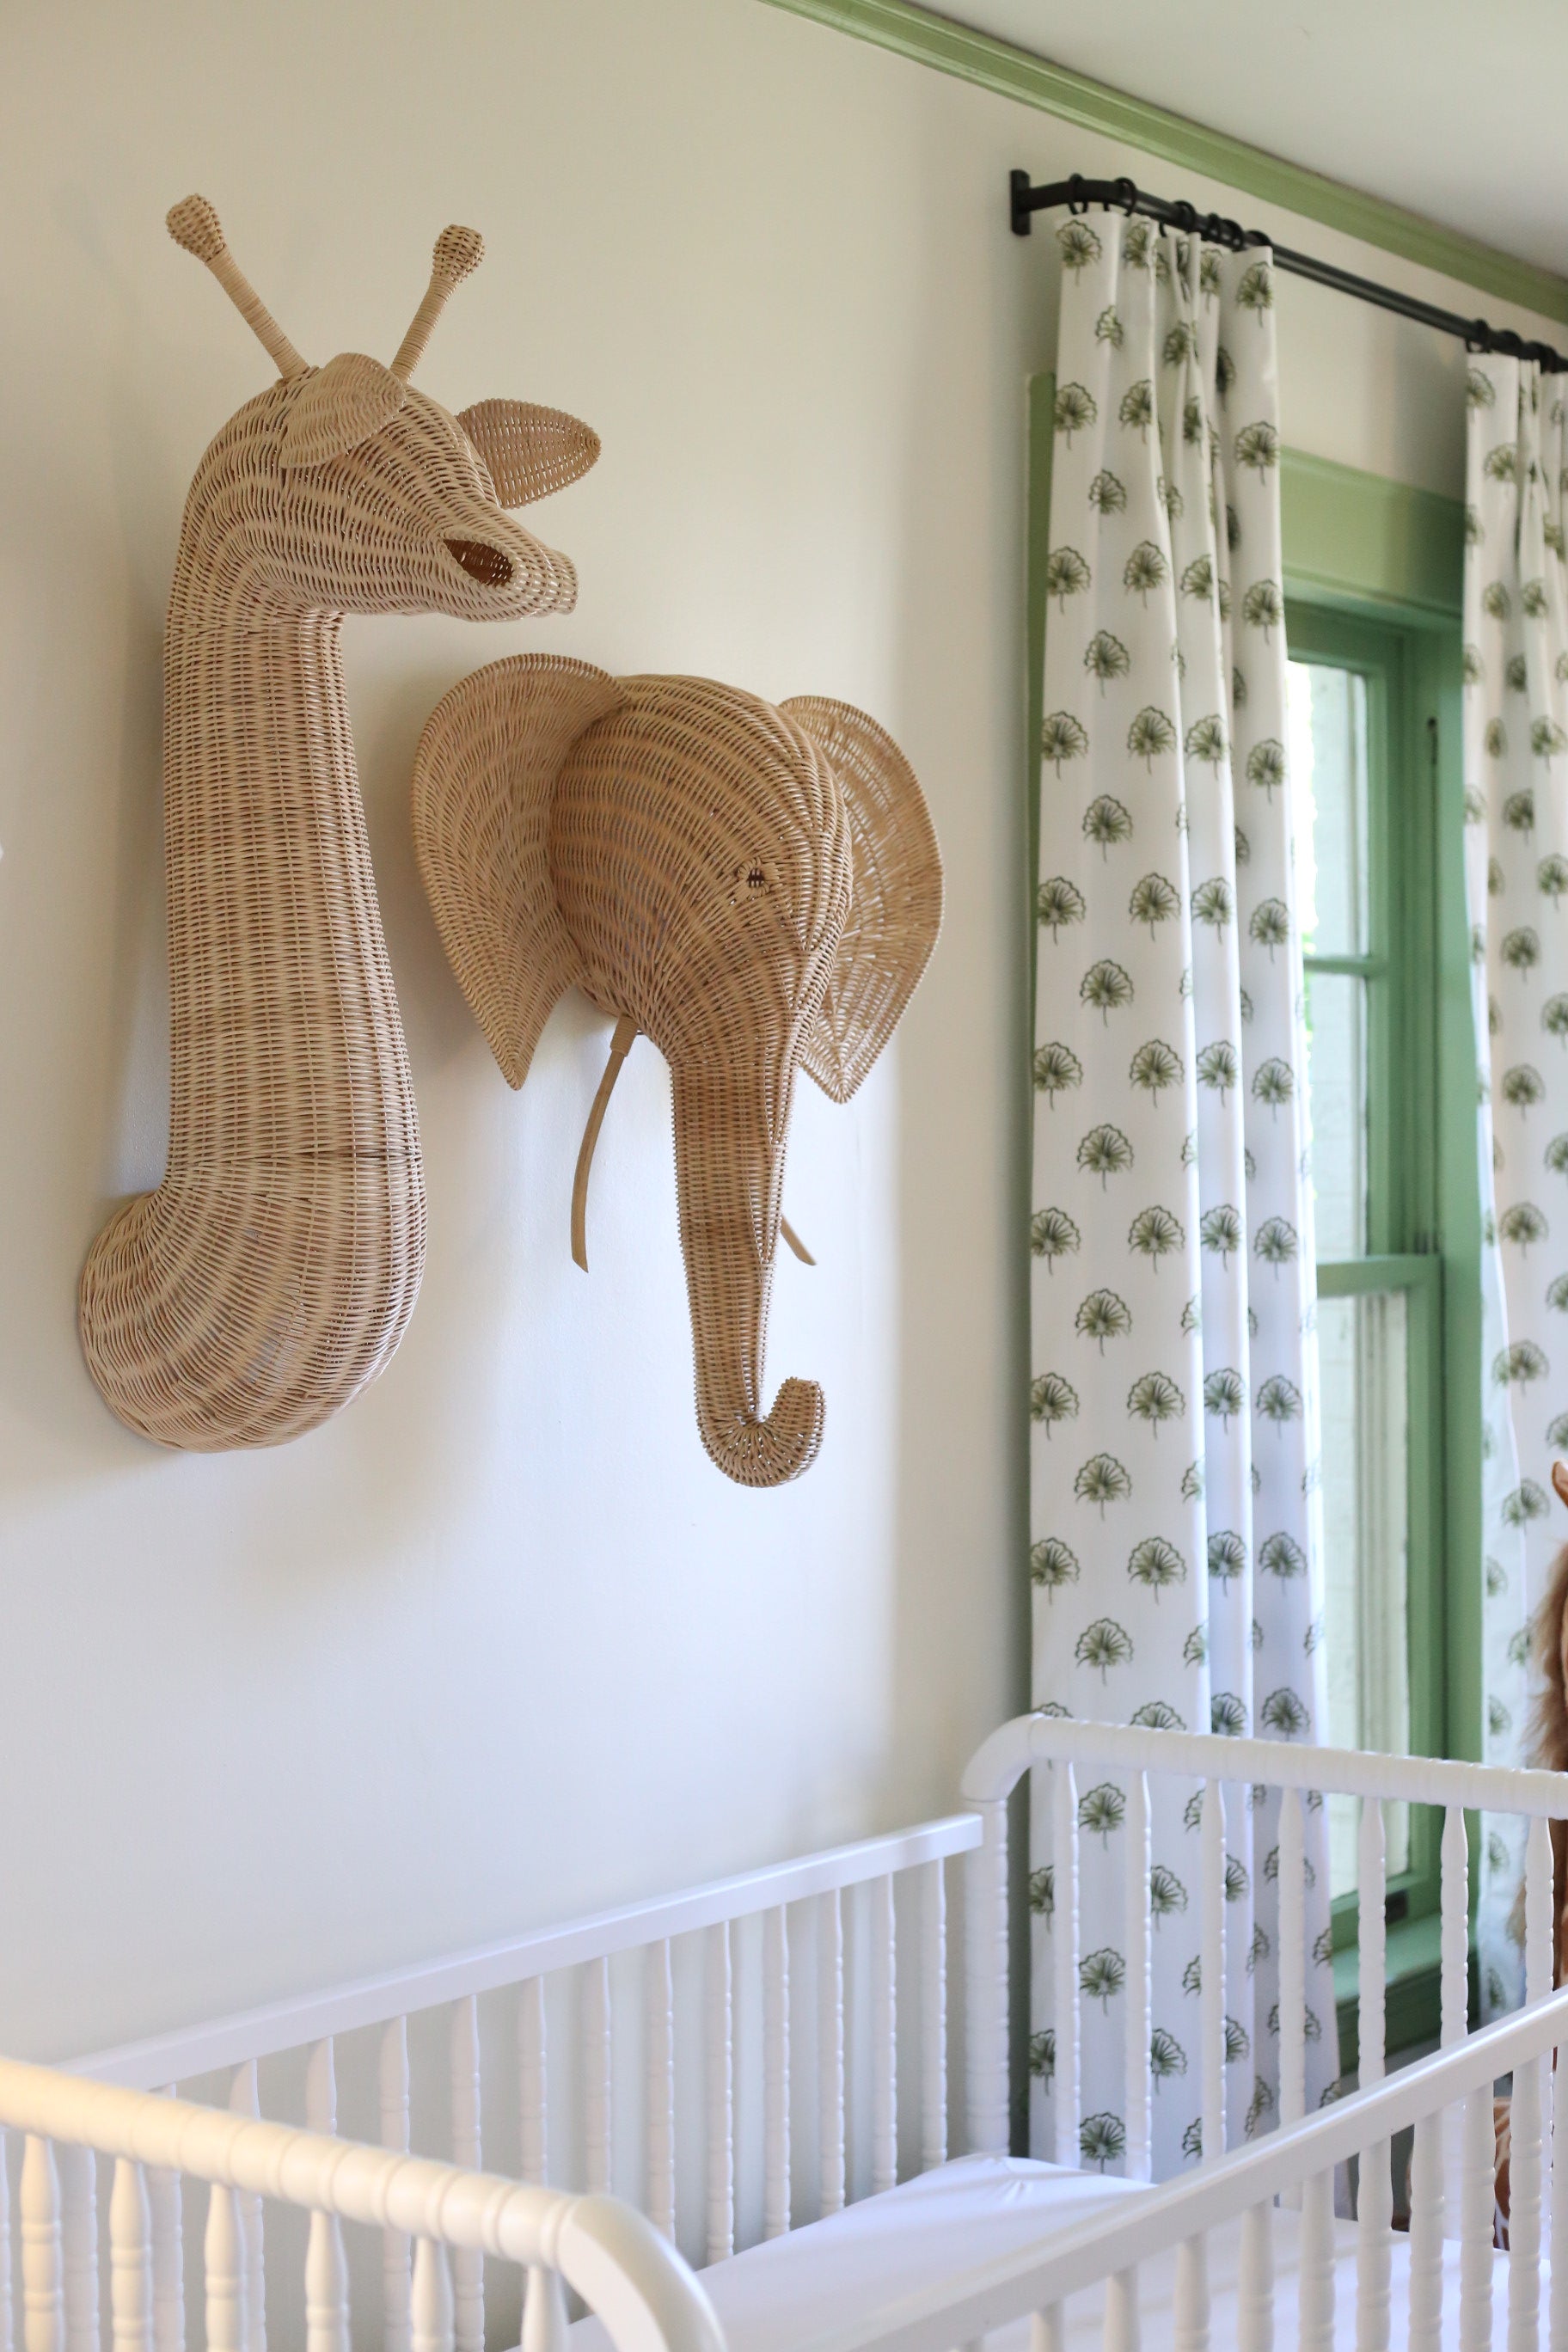 Hanging rattan elephant and giraffe next to green floral custom curtains hanging on a rod in front of a window and white crib